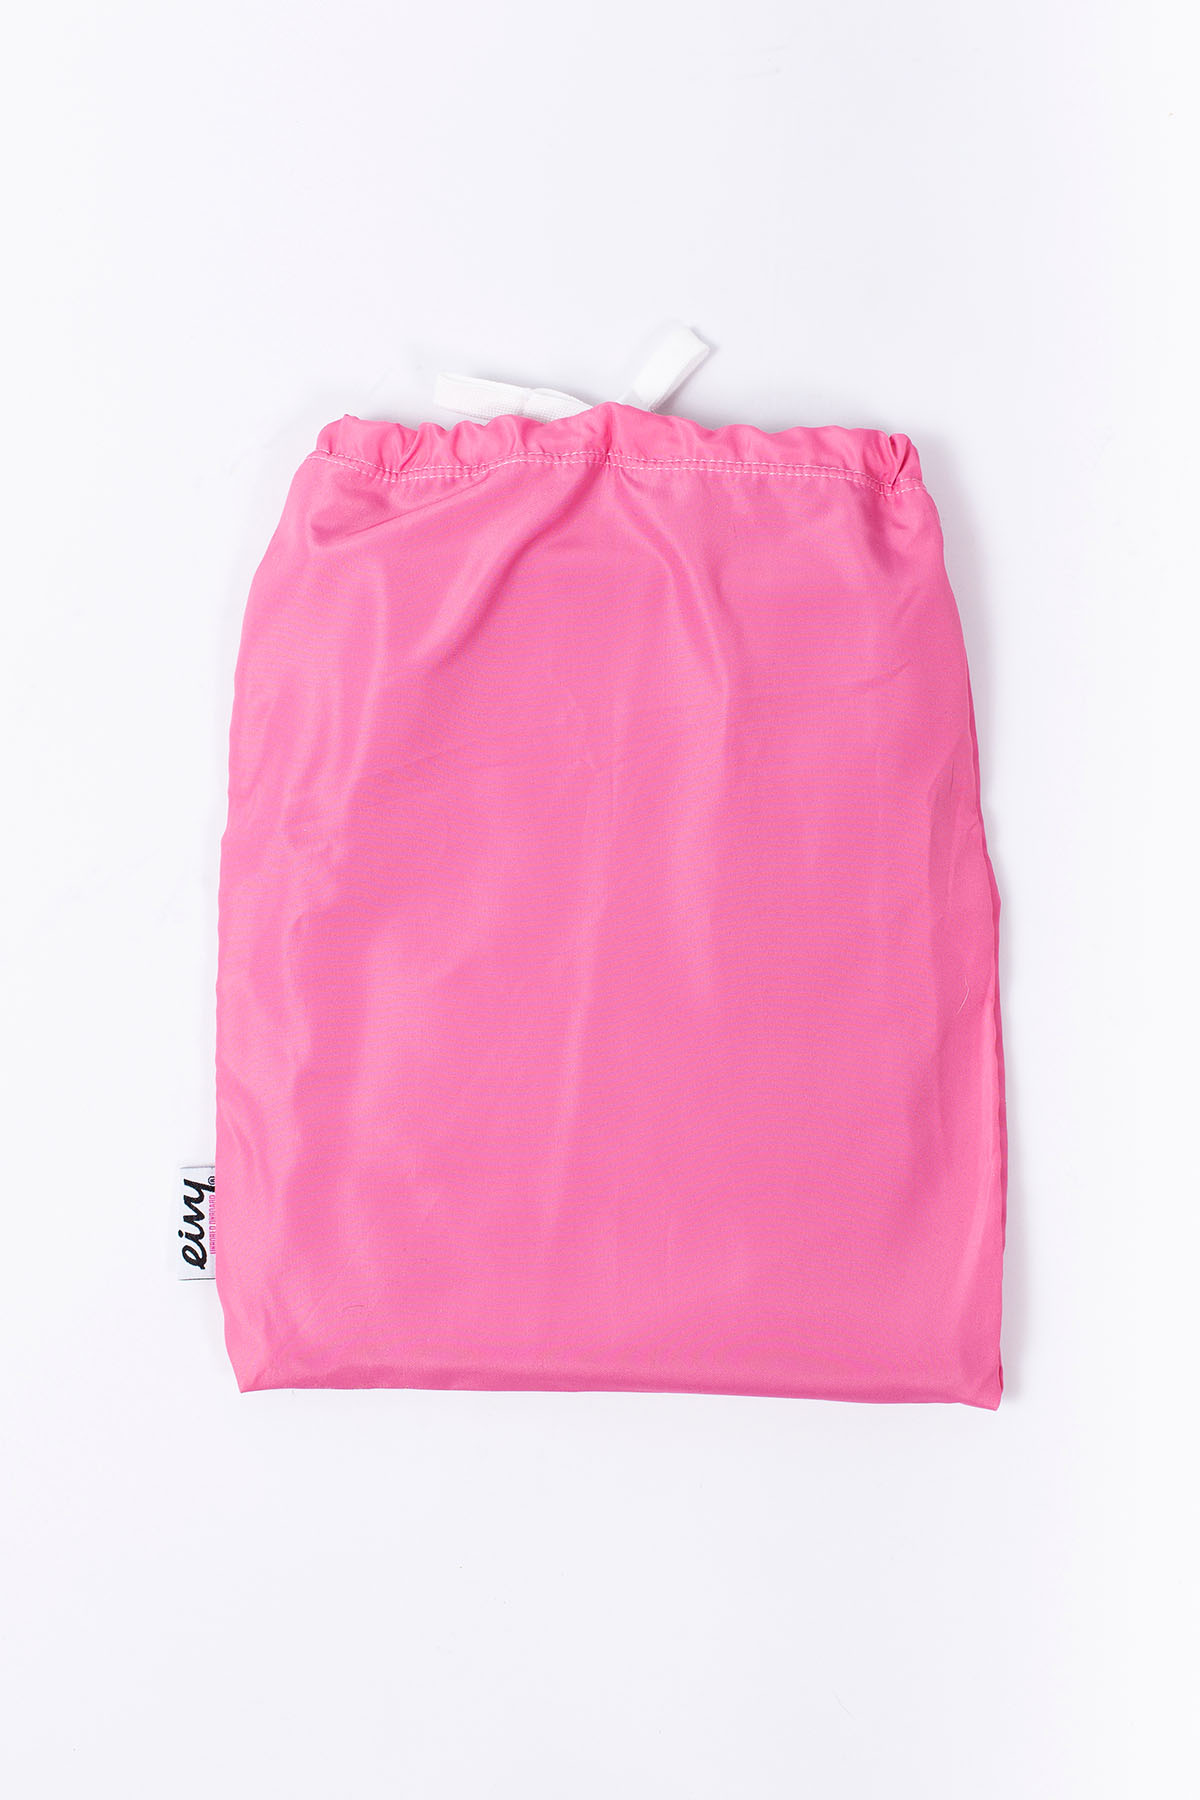 Icecold Tights - MX Pink | XL